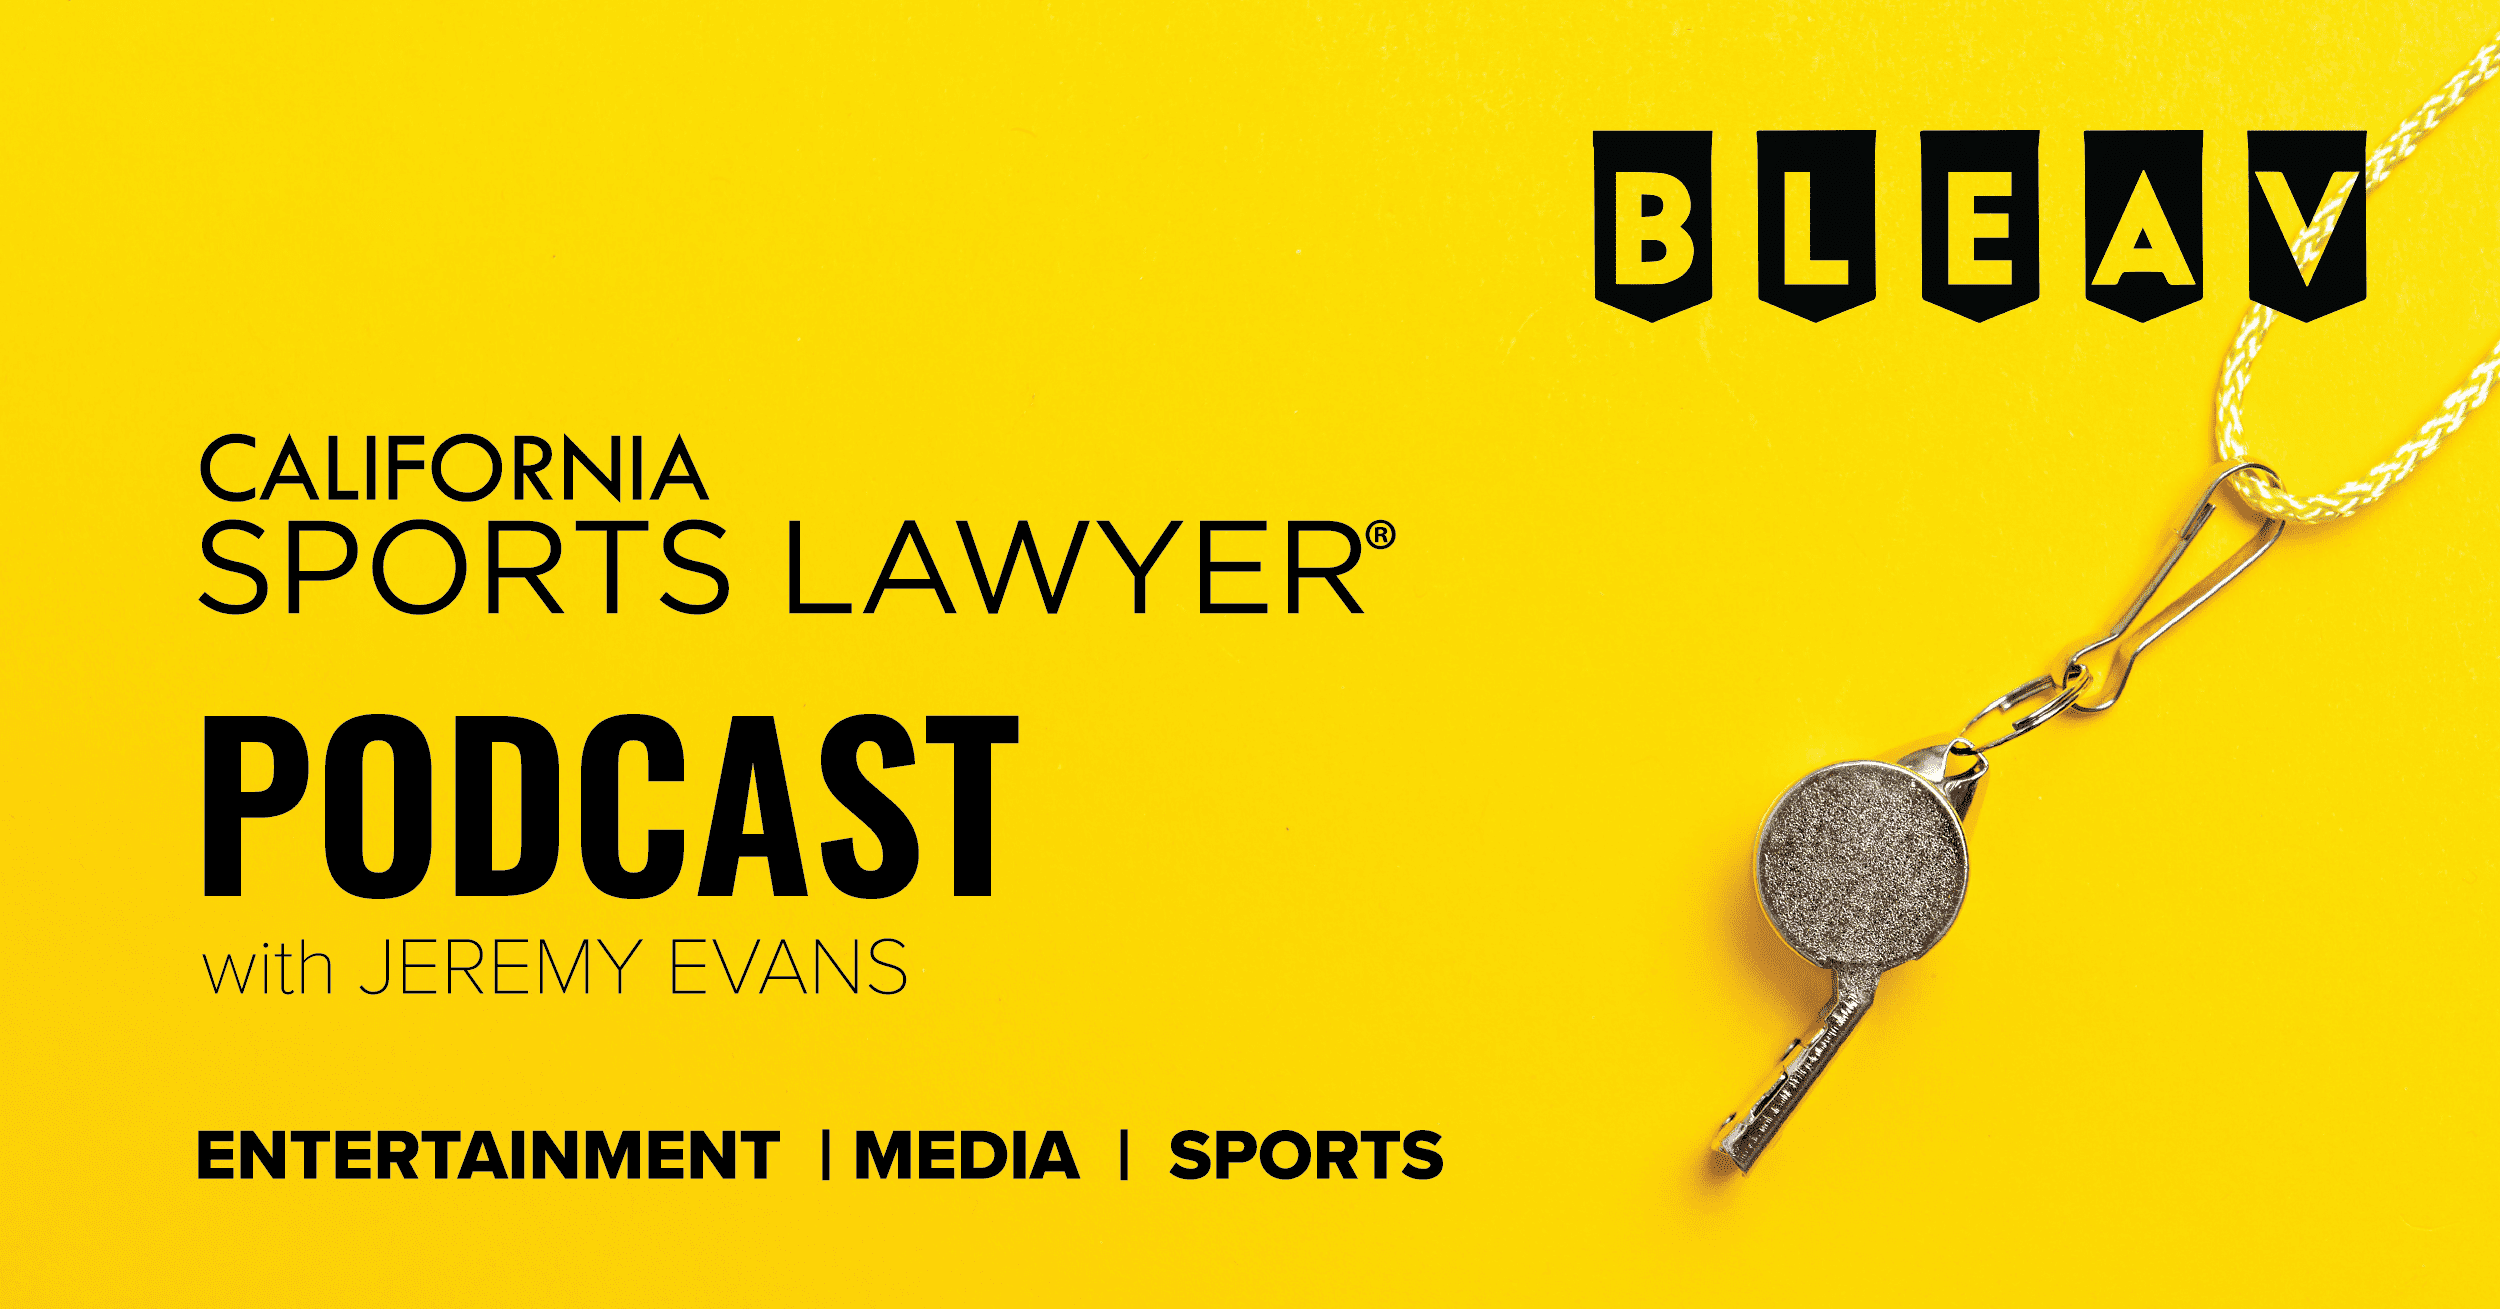 California Sports Lawyer® Podcast with Jeremy Evans: 30+ Minutes of Fame w/ Robert Fountain, Corporate Counsel at Texas Rangers Baseball Club (MLB)